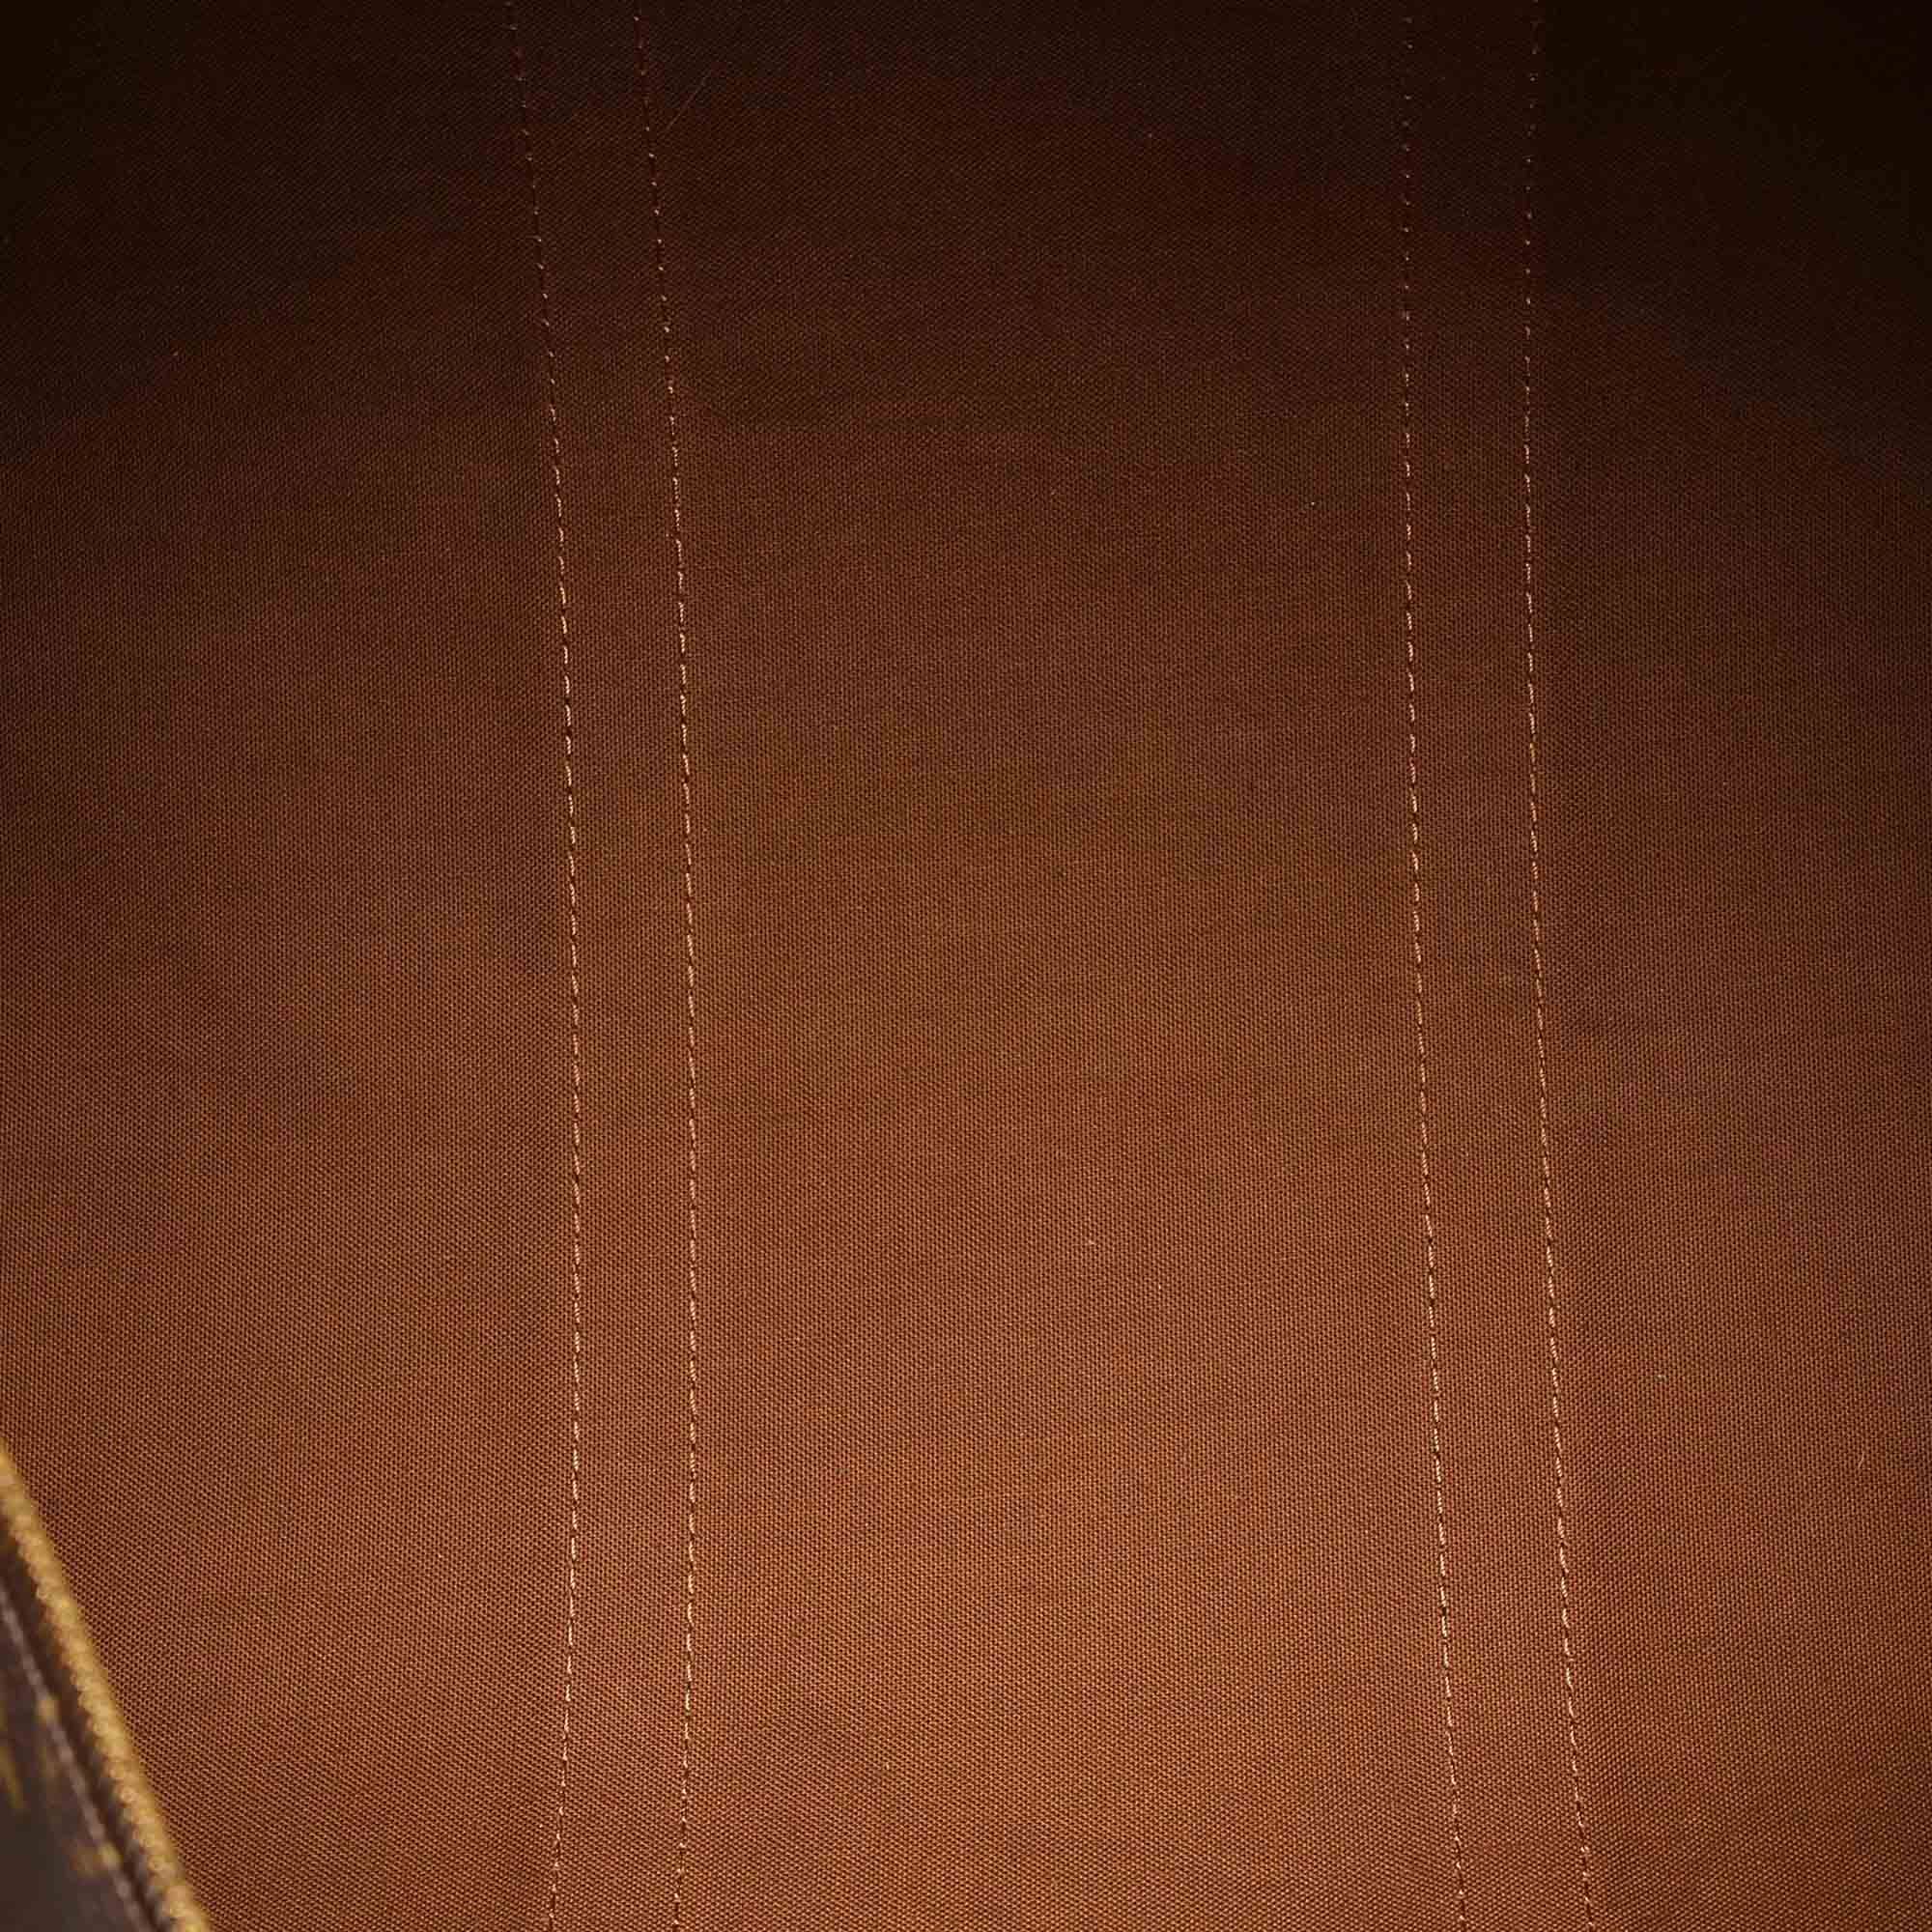 VINTAGE. RRP AS NEW. The Keepall Bandouliere 60 features the Monogram canvas body with vachetta trim, rolled vachetta handles, a detachable flat strap, and a two-way top zip closure.Exterior back is discolored. Exterior bottom is discolored. Exterior corners is discolored. Exterior front is discolored. Exterior handle is discolored. Exterior side is discolored. Buckle is scratched and tarnished. Zipper is scratched and tarnished.

Dimensions:
Length 27cm
Width 60cm
Depth 24.5cm
Hand Drop 33cm
Shoulder Drop 33cm

Original Accessories: Name Tag

Serial Number: SP0926
Color: Brown
Material: Canvas x Monogram Canvas x Leather x Vachetta Leather
Country of Origin: France
Boutique Reference: SSU92769K1407


Product Rating: GoodCondition

To help provide you with a wider range of products, this item will be shipped to you from an international warehouse. This means that the delivery may take a little bit longer than usual. Tracking details will be provided for you inside your dispatch email and in your account